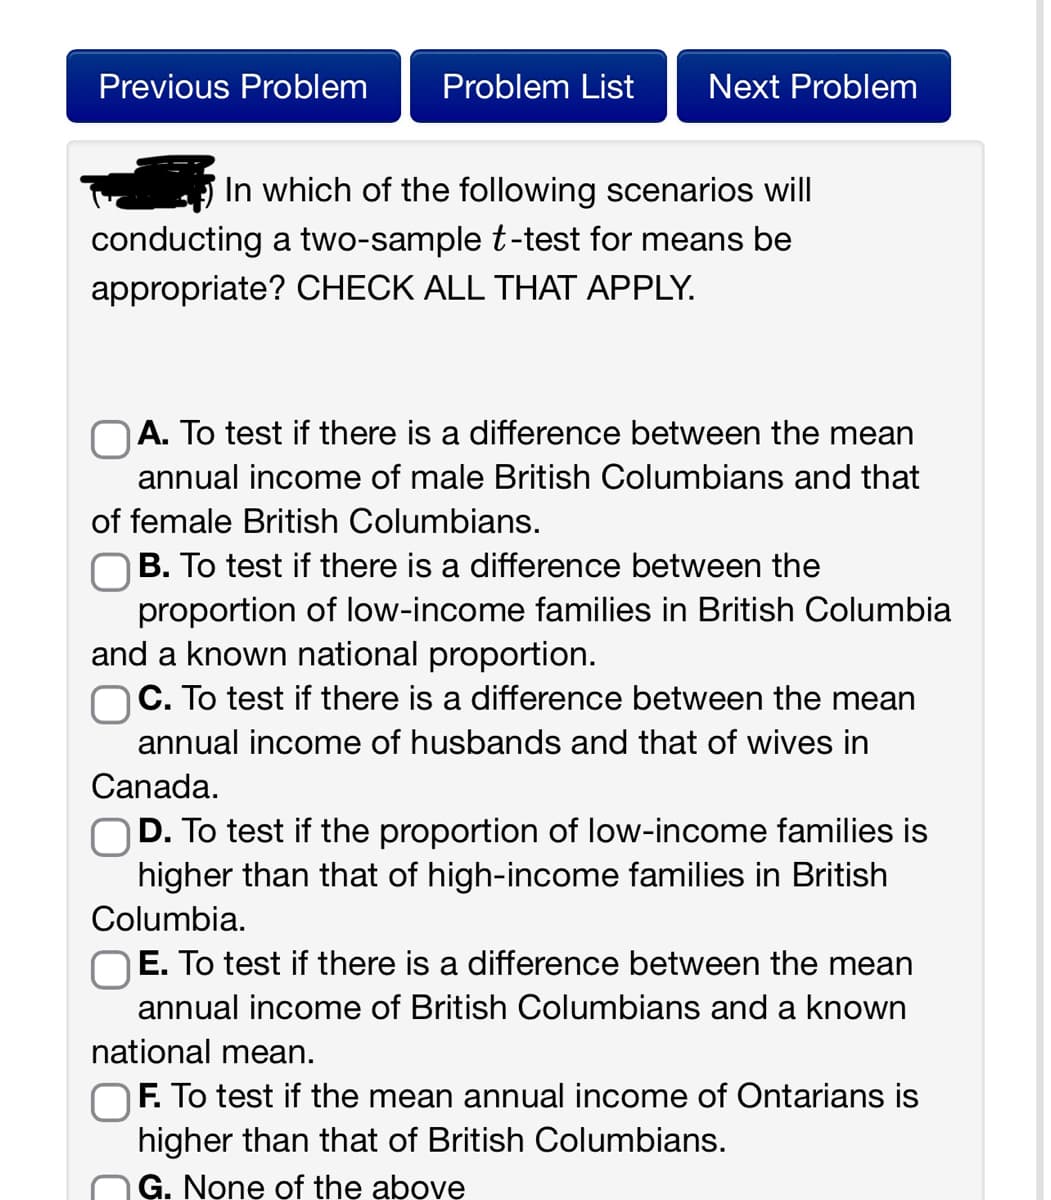 Previous Problem
Problem List Next Problem
In which of the following scenarios will
conducting a two-sample t-test for means be
appropriate? CHECK ALL THAT APPLY.
OA. To test if there is a difference between the mean
annual income of male British Columbians and that
of female British Columbians.
B. To test if there is a difference between the
proportion of low-income families in British Columbia
and a known national proportion.
OC. To test if there is a difference between the mean
annual income of husbands and that of wives in
Canada.
D. To test if the proportion of low-income families is
higher than that of high-income families in British
Columbia.
E. To test if there is a difference between the mean
annual income of British Columbians and a known
national mean.
F. To test if the mean annual income of Ontarians is
higher than that of British Columbians.
G. None of the above